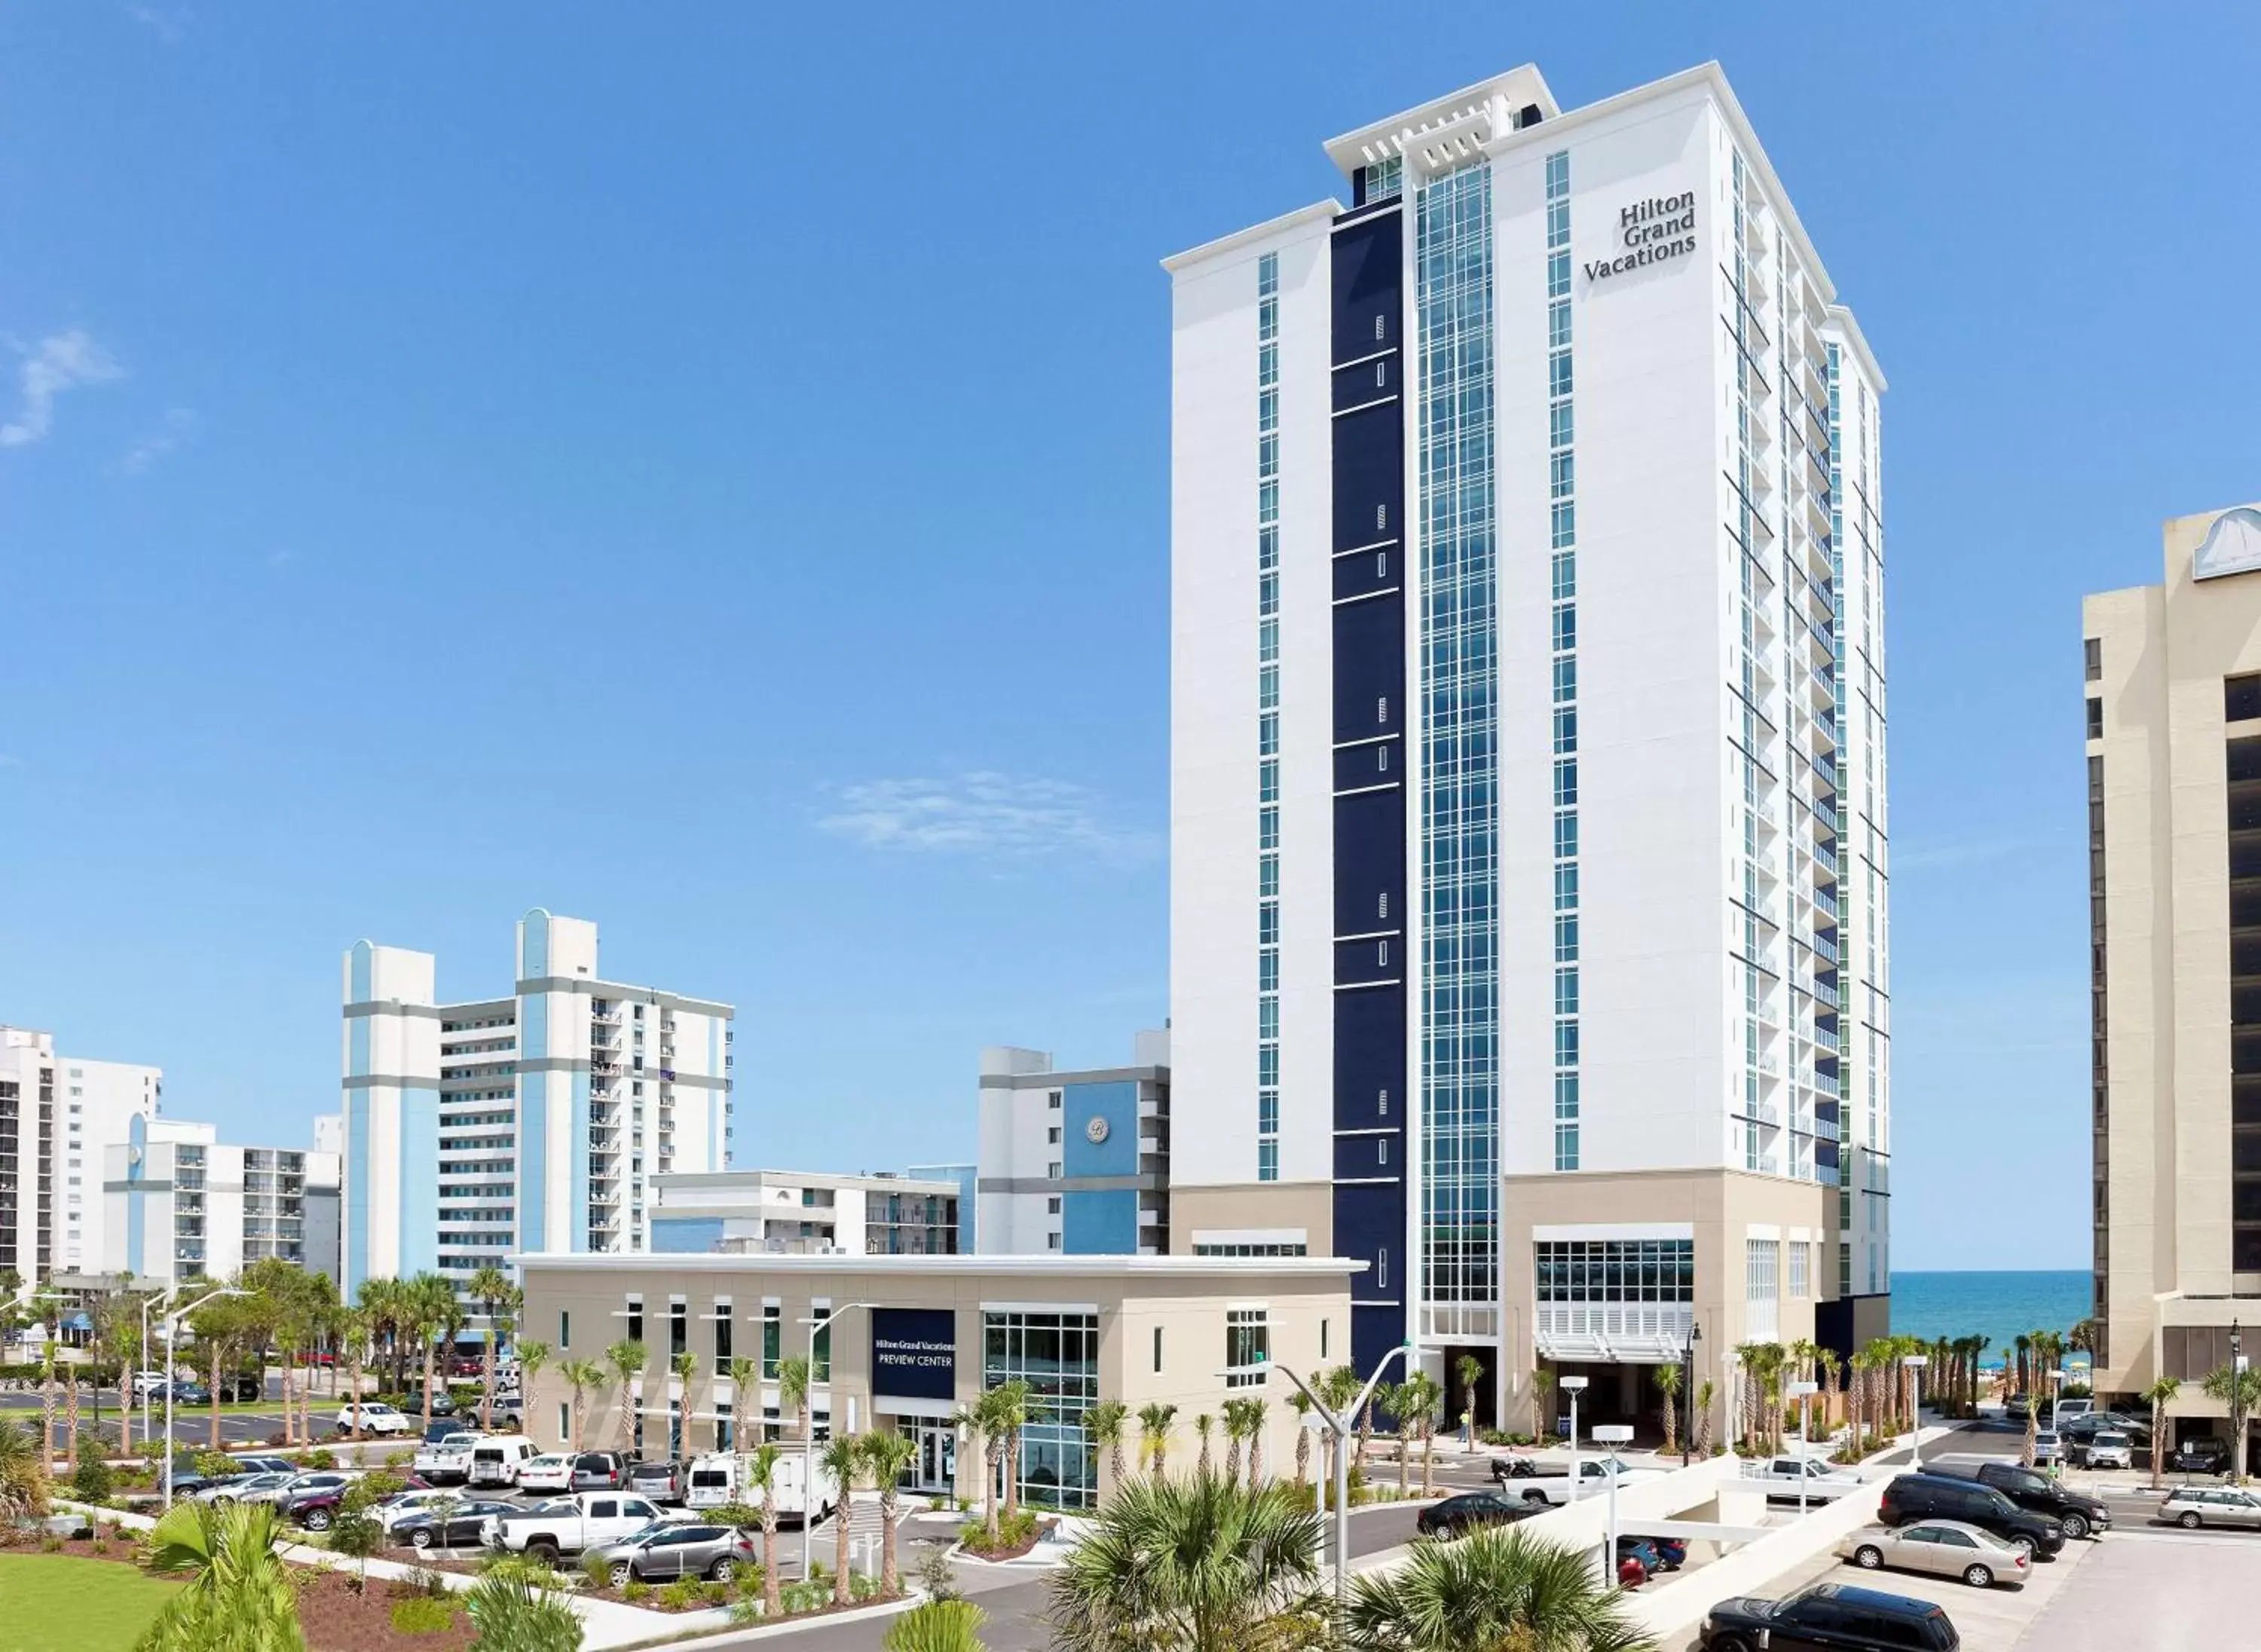 Property Building in Hilton Grand Vacations Club Ocean 22 Myrtle Beach